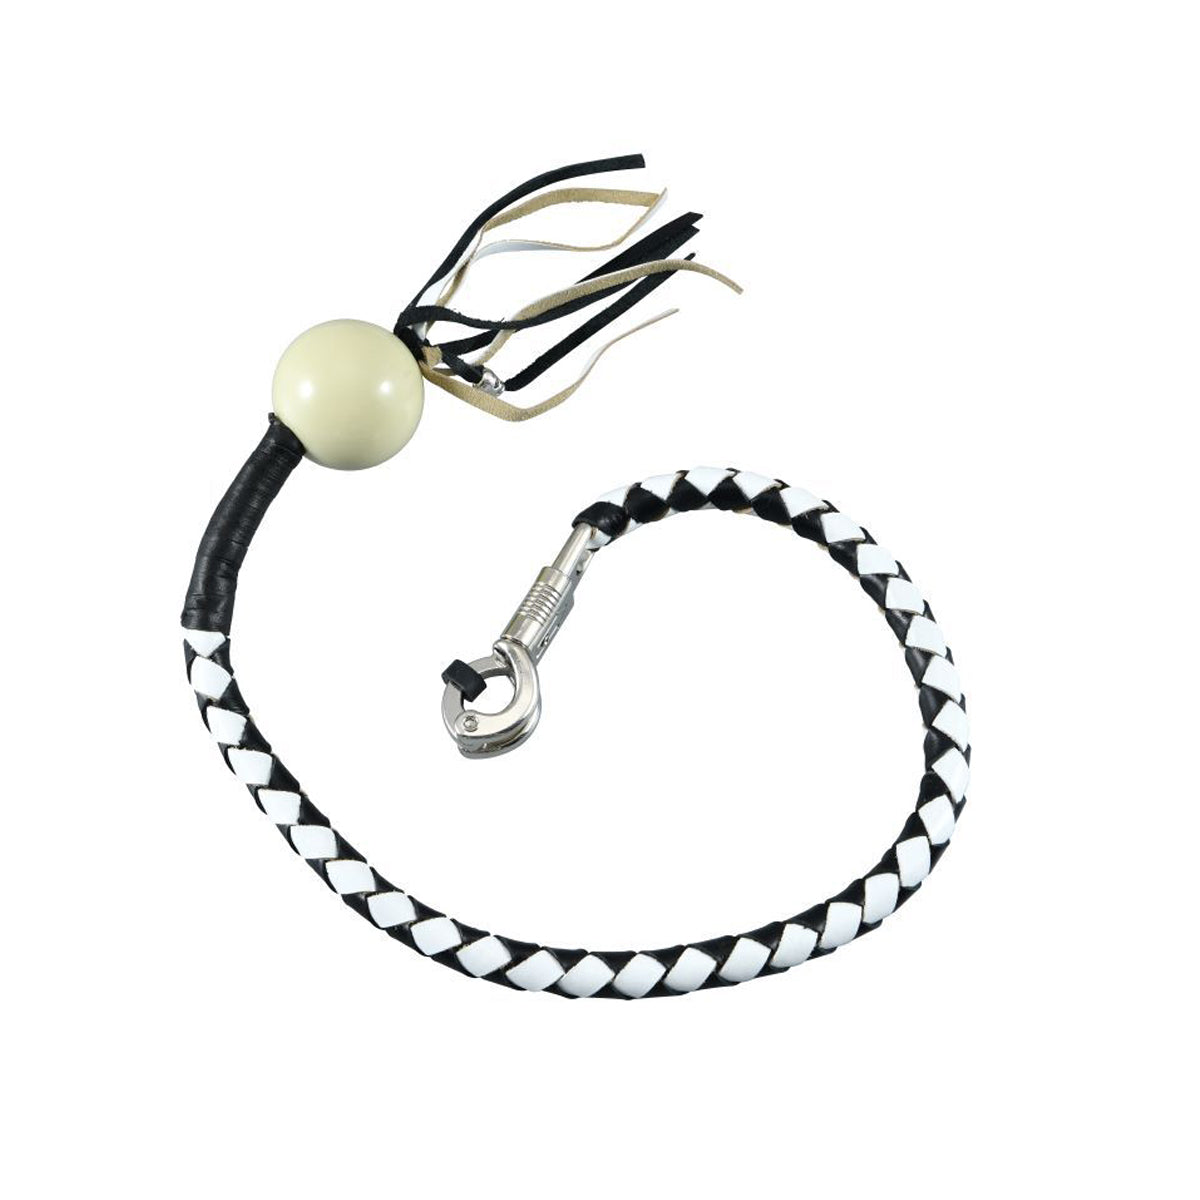 Dream Apparel® Black And White Fringed Get Back Whip with White Pool Ball